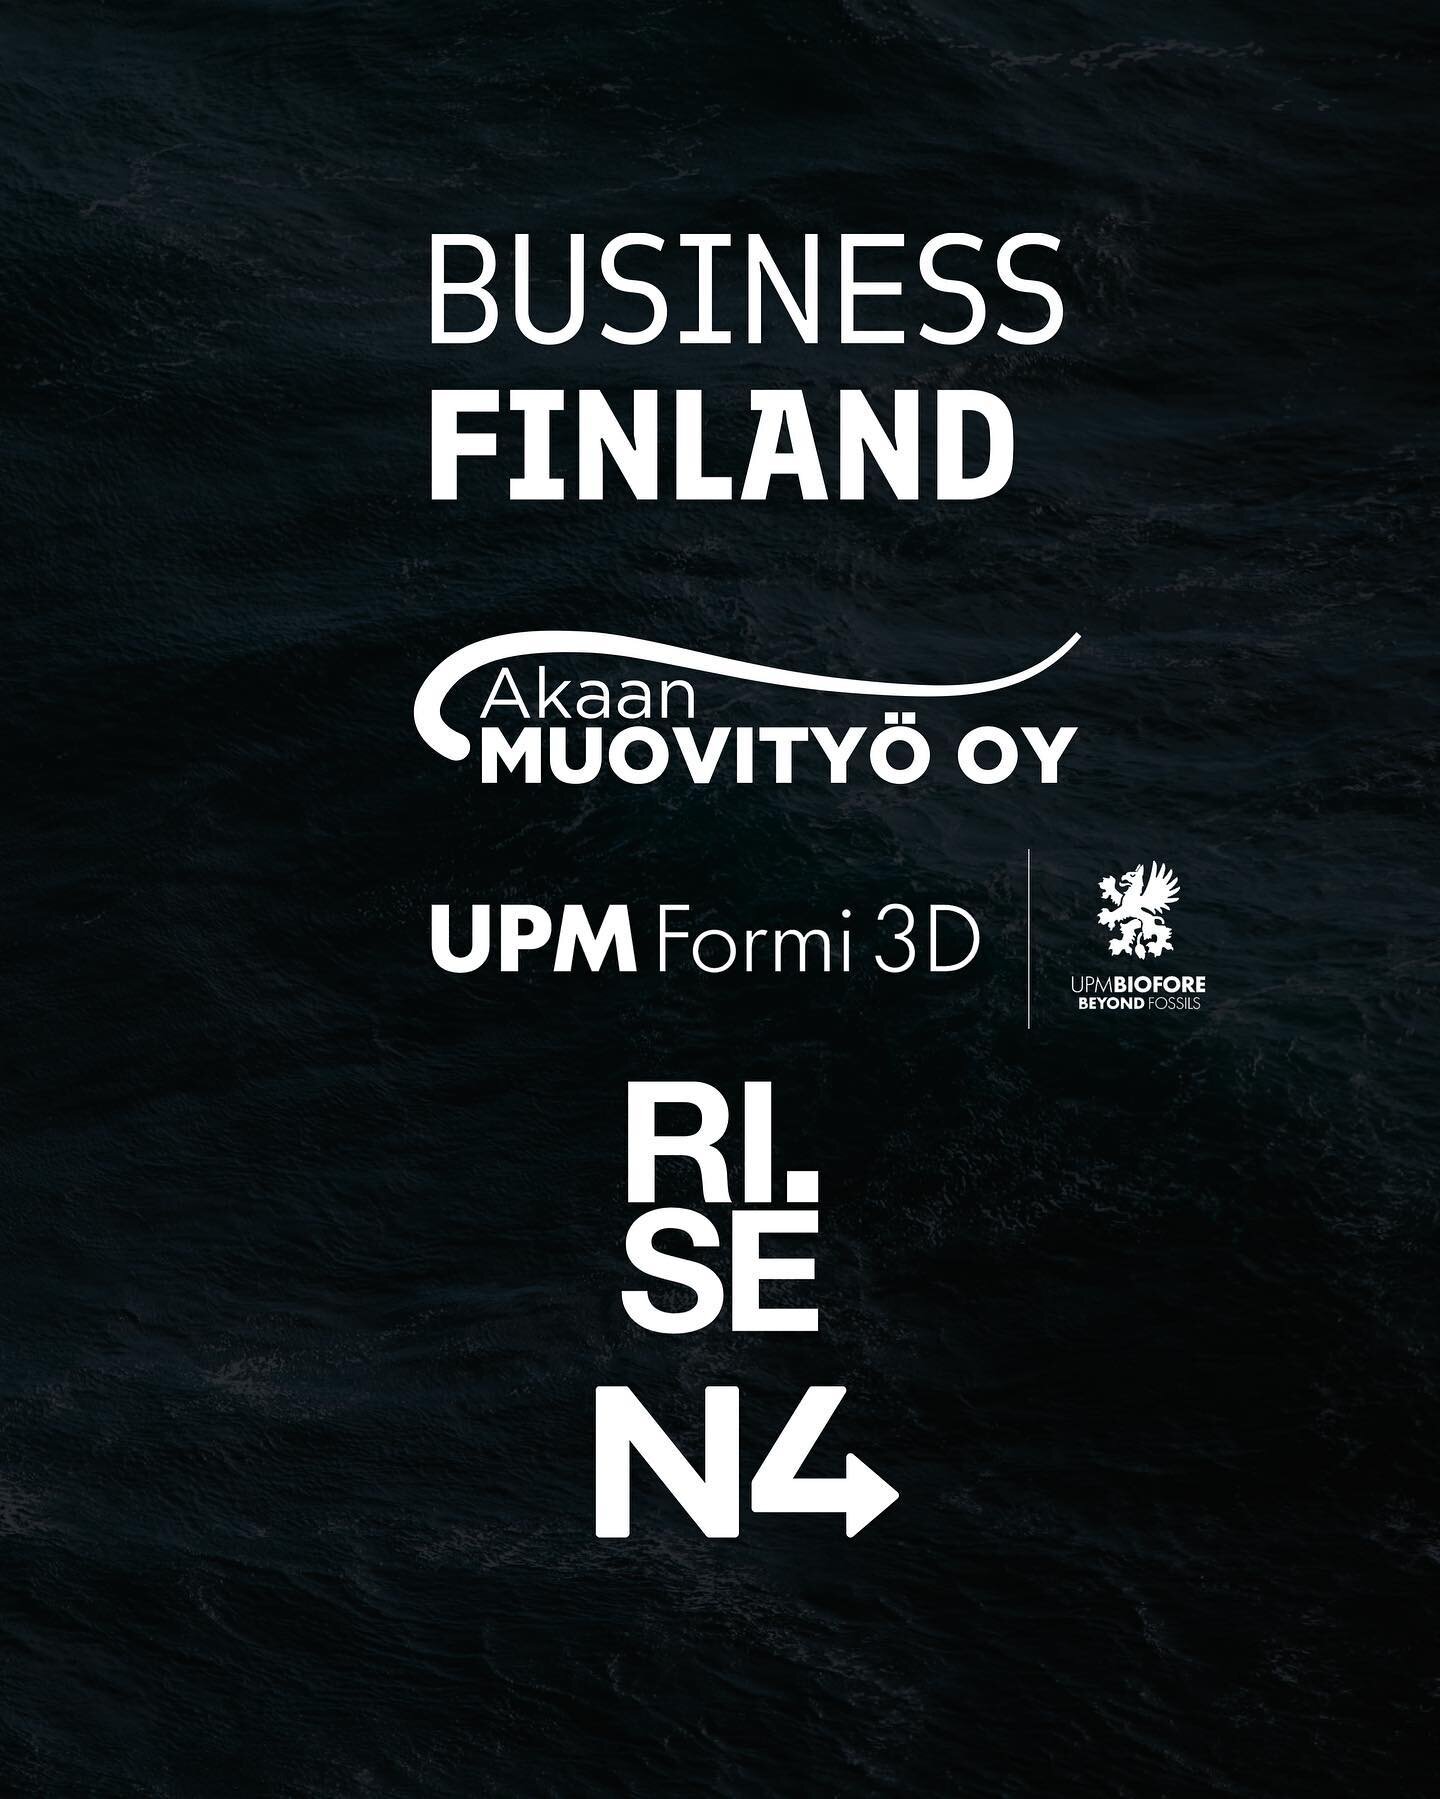 A vision like Parexo&rsquo;s is impossible to accomplish without the help from the best in the business. Therefore, we are excited to introduce you to our partners in this project: 

@Businessfinlandfi
Akaan Muovity&ouml; Oy
UPM Formi 3D
Research Ins